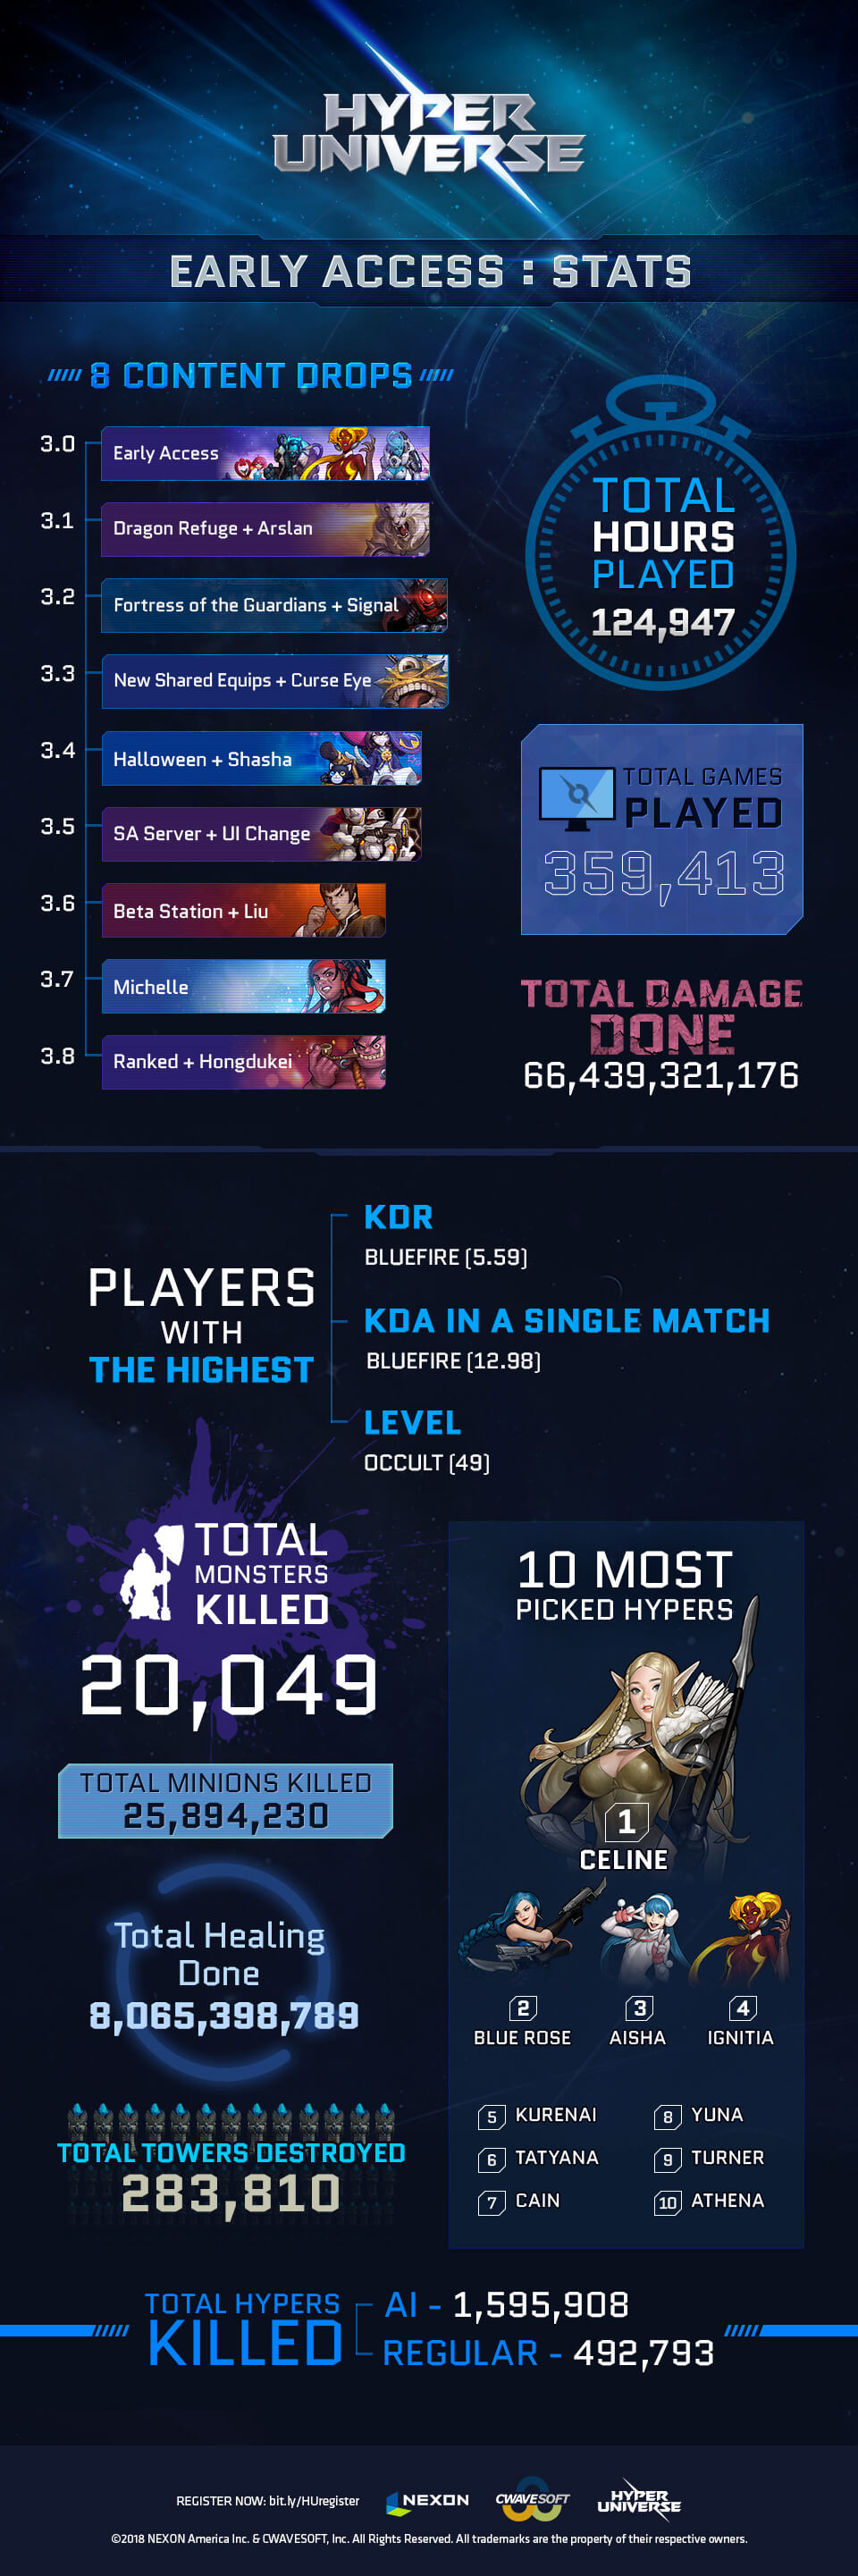 Hyper_Universe_Infographic